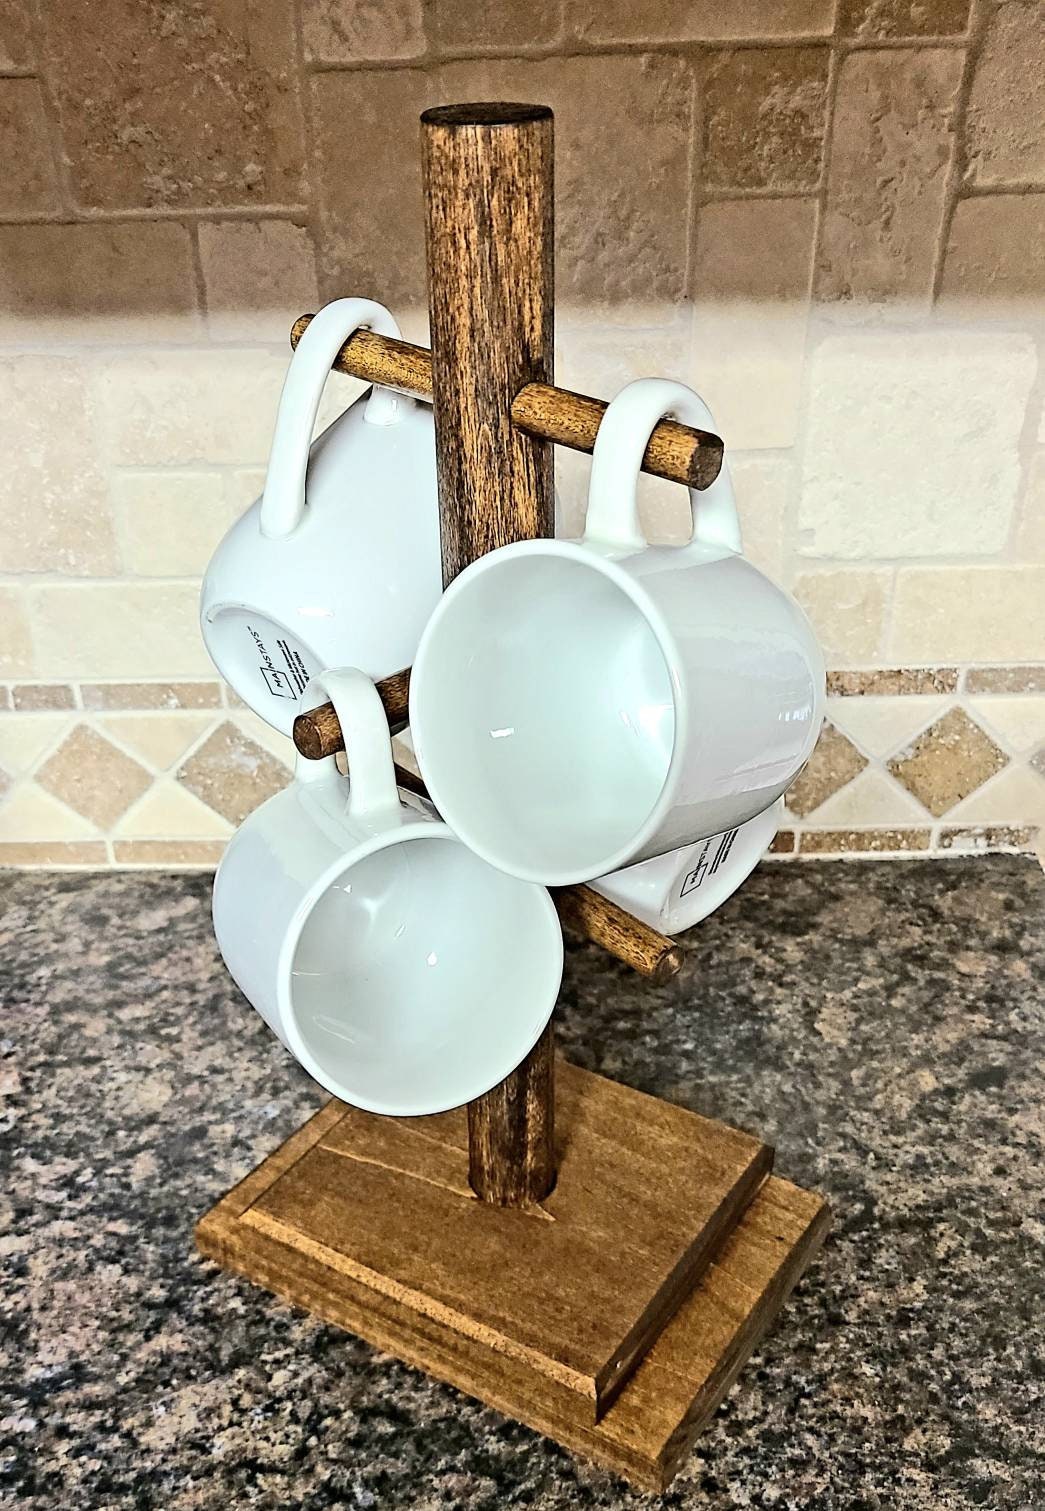 FANGSUN Large Coffee Mug Holder Stand Countertop, Tree Rack for 14 Mugs, 2  Tier Counter Display Storage, Metal Wire Tea Cup Holder for Coffee Station